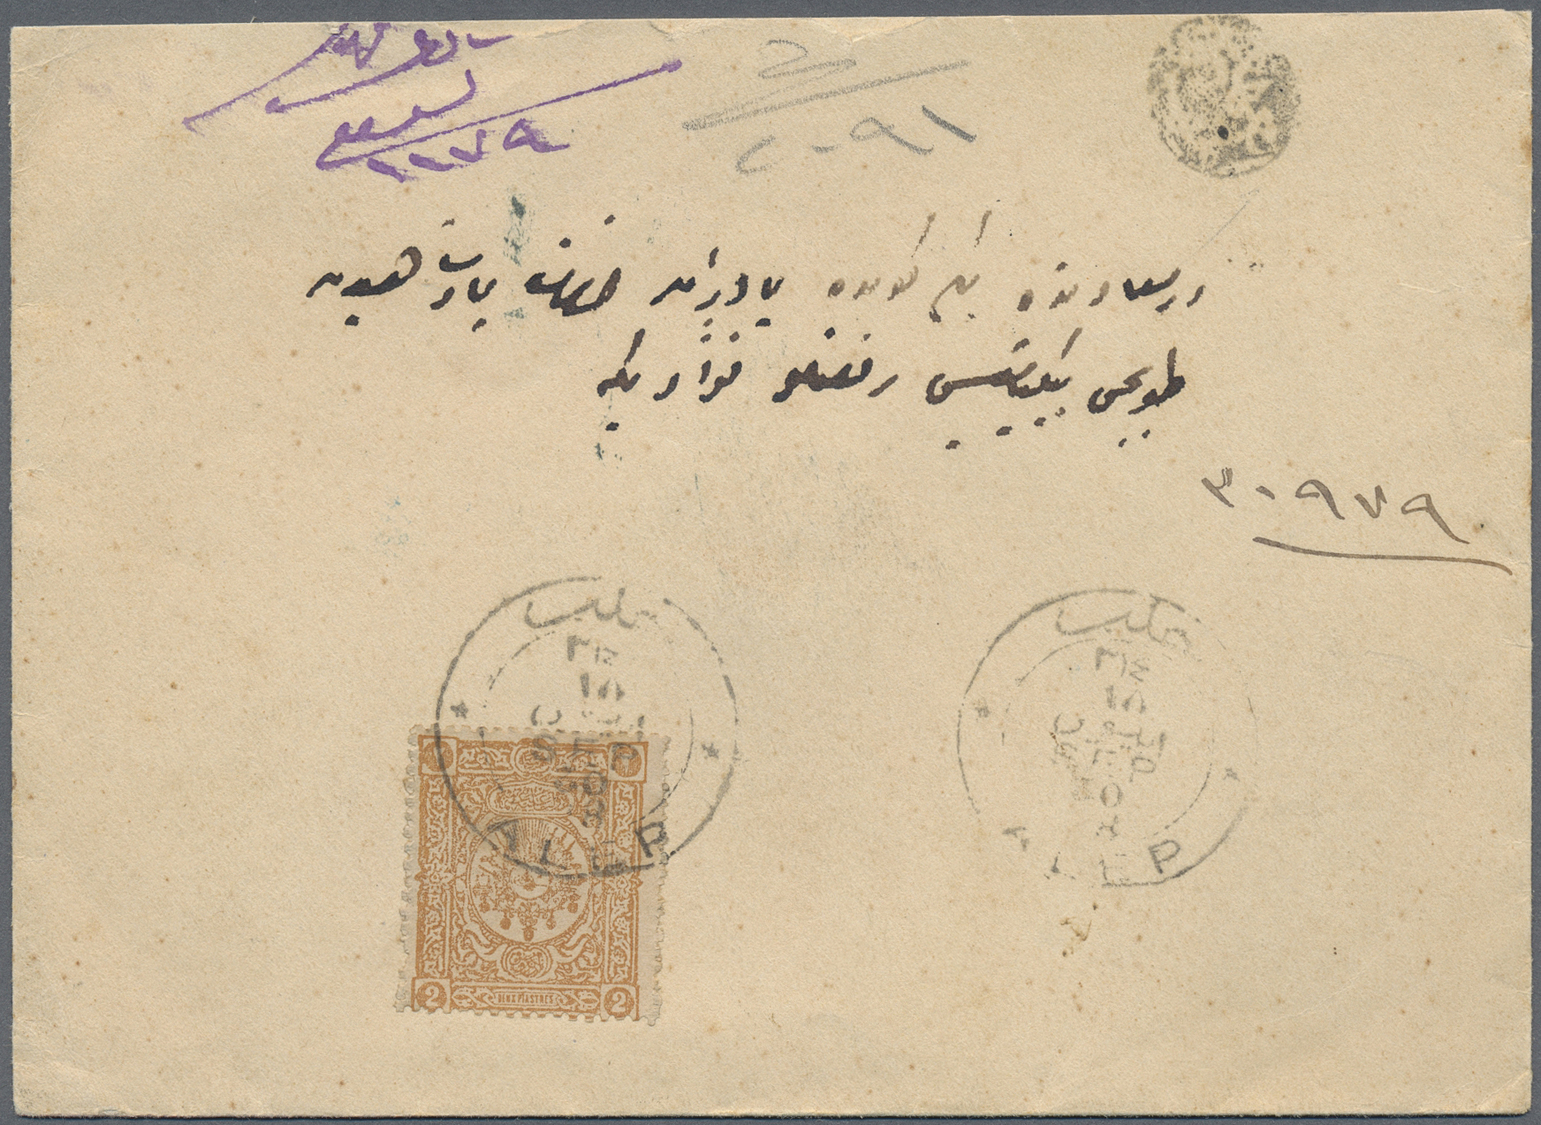 Br Syrien: 1898 Sep. 30, "Alep" Cds. With Stars Tying 2 Piasters Ochre Ottoman To Istanbul - Turkey Arrival And Wax Seal - Syria